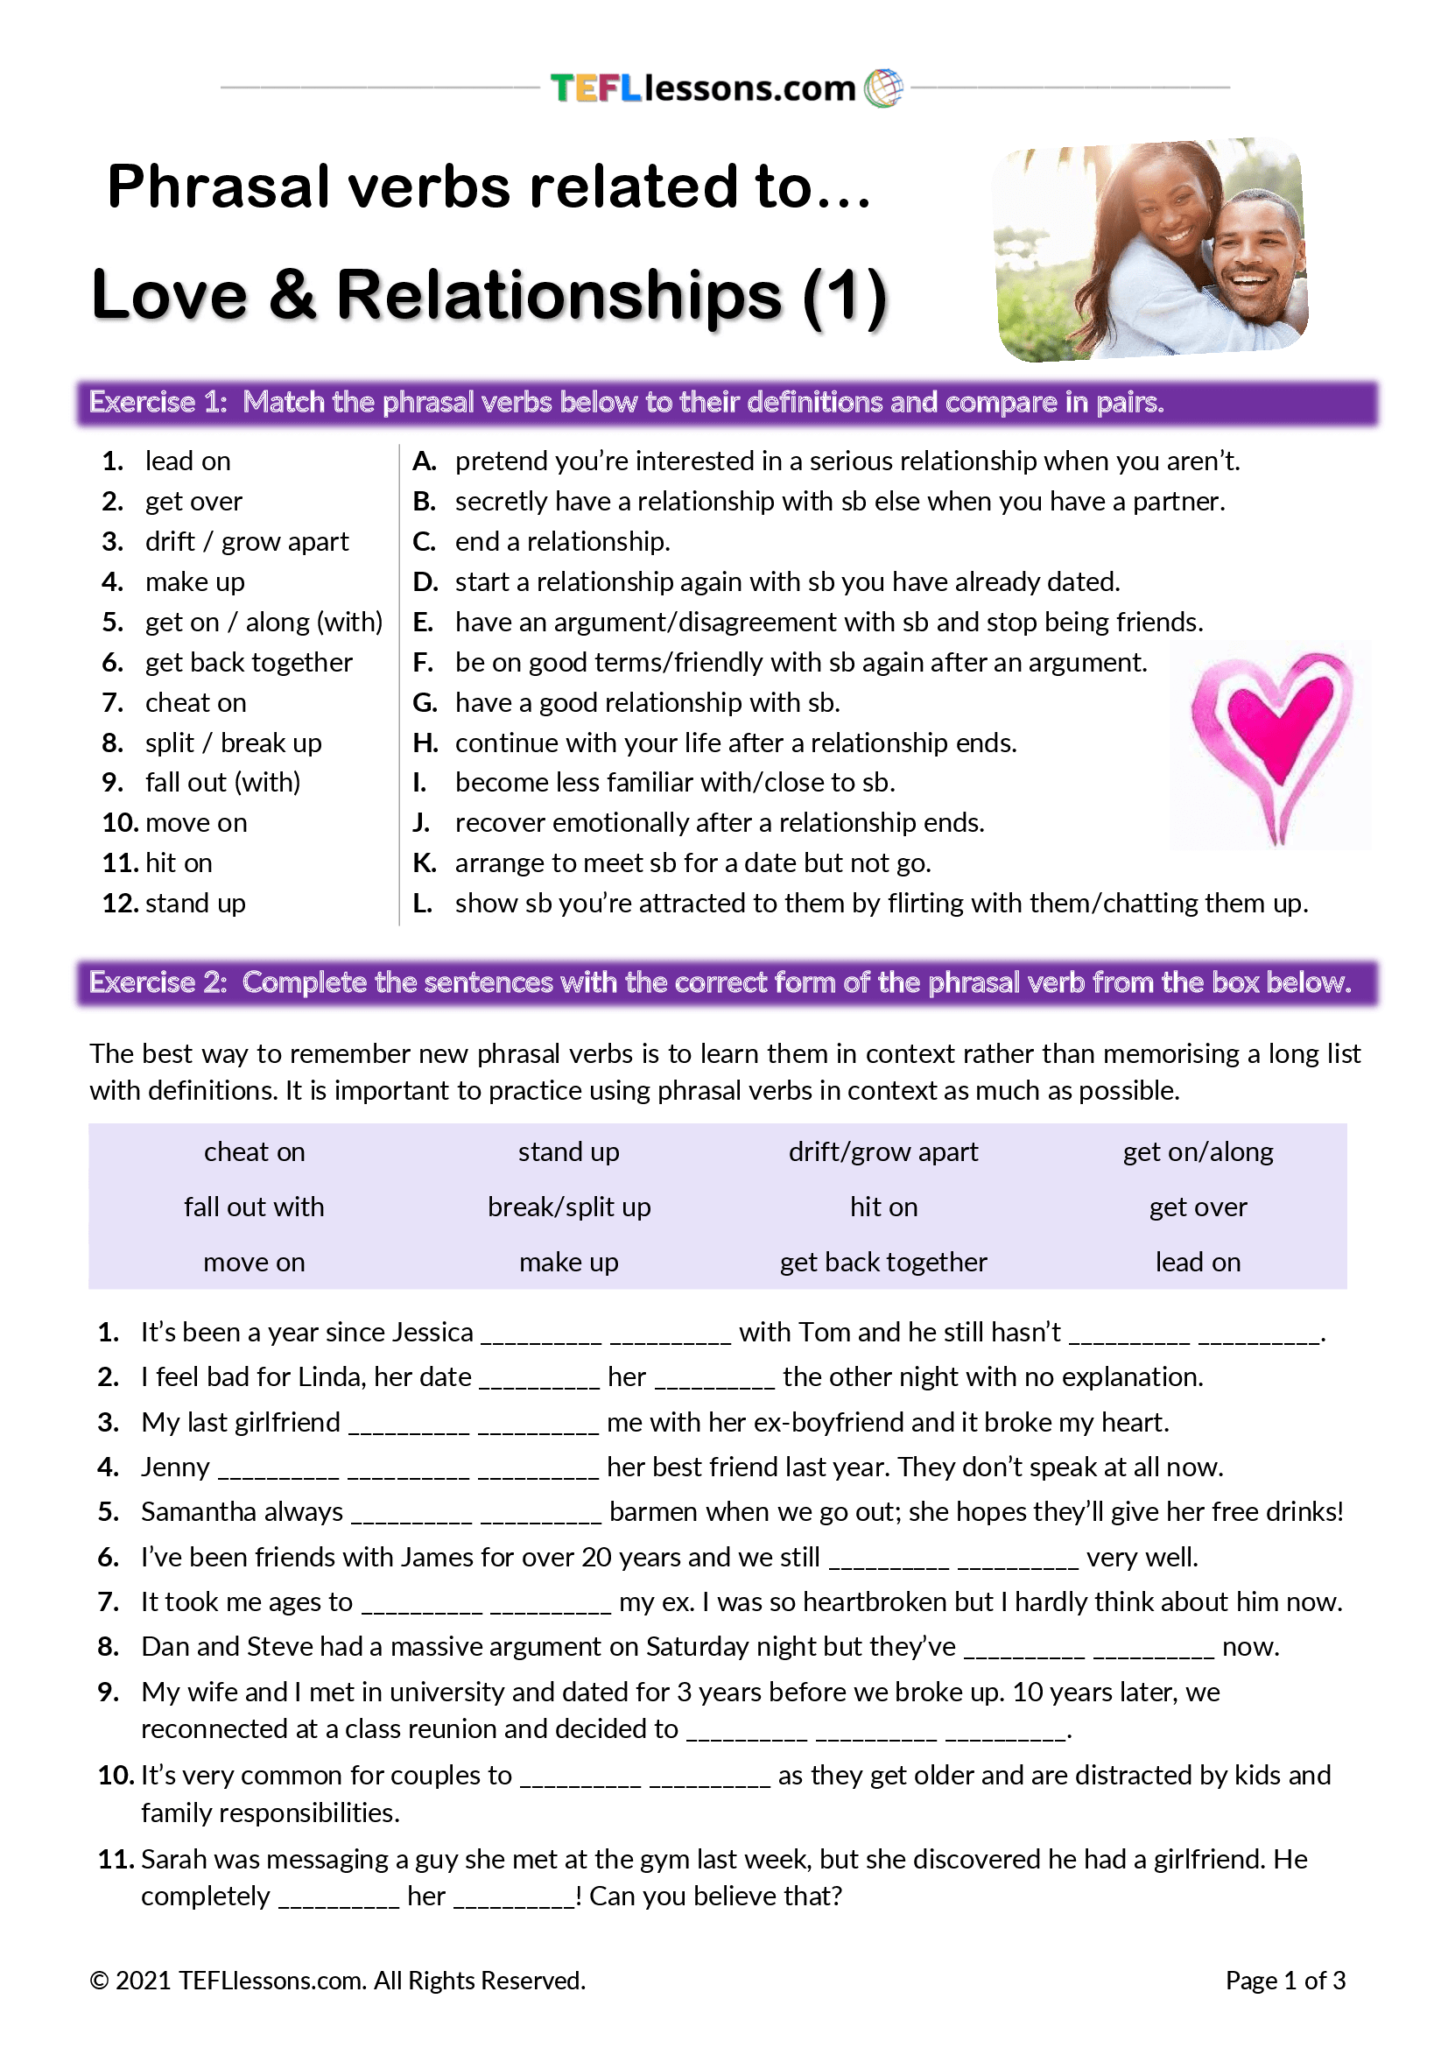 love-and-relationships-phrasal-verbs-1-tefllessons-free-lesson